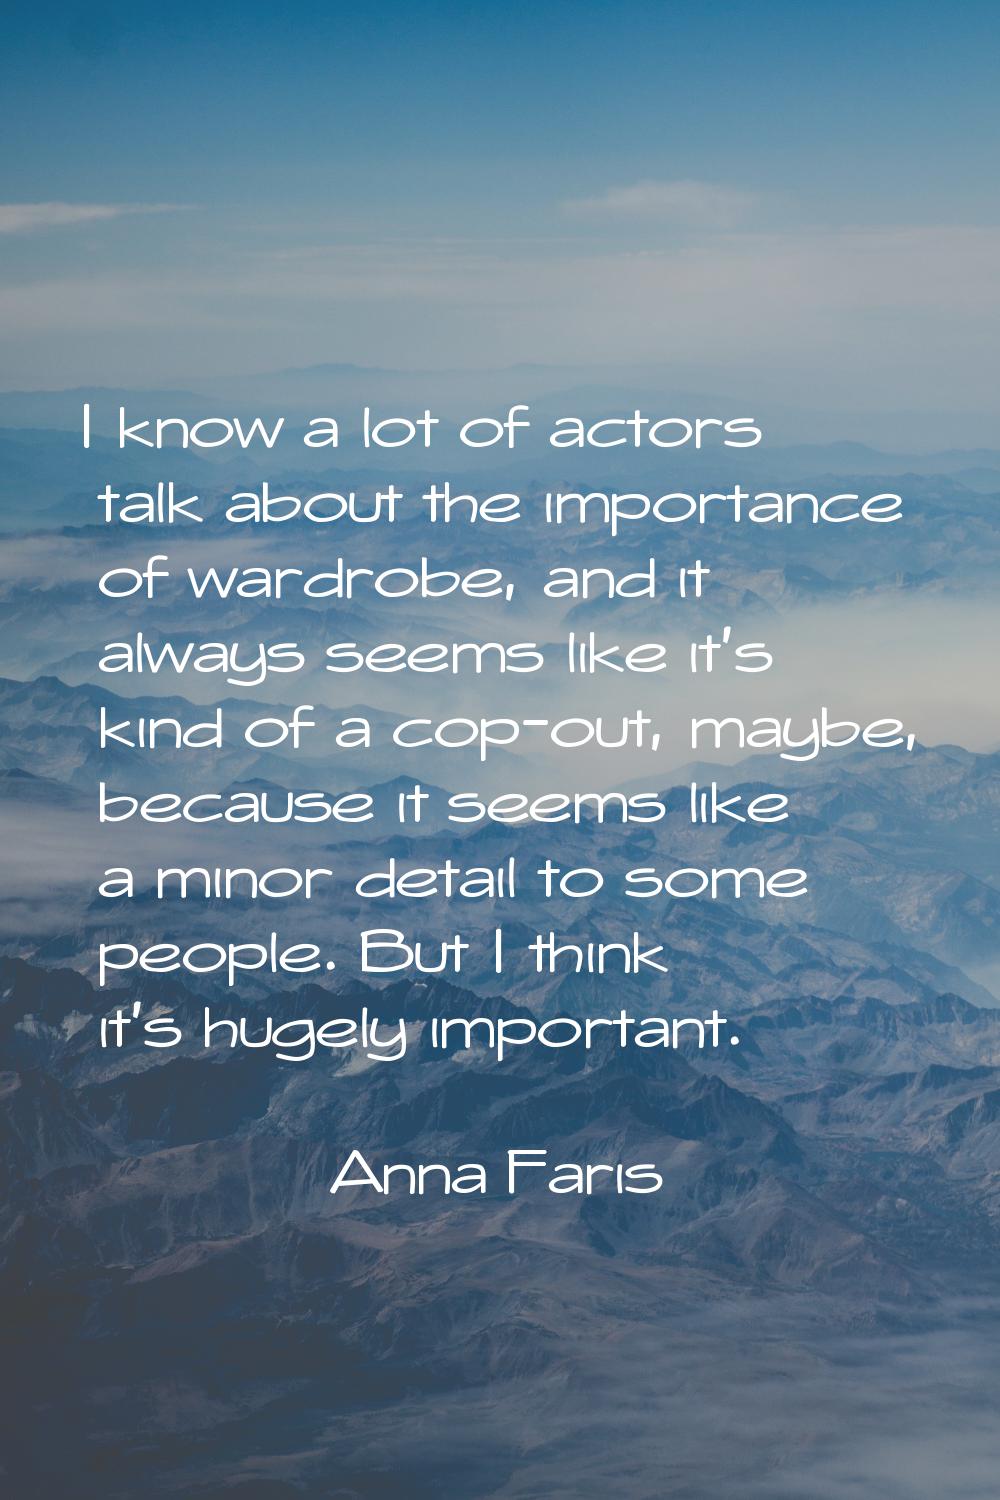 I know a lot of actors talk about the importance of wardrobe, and it always seems like it's kind of